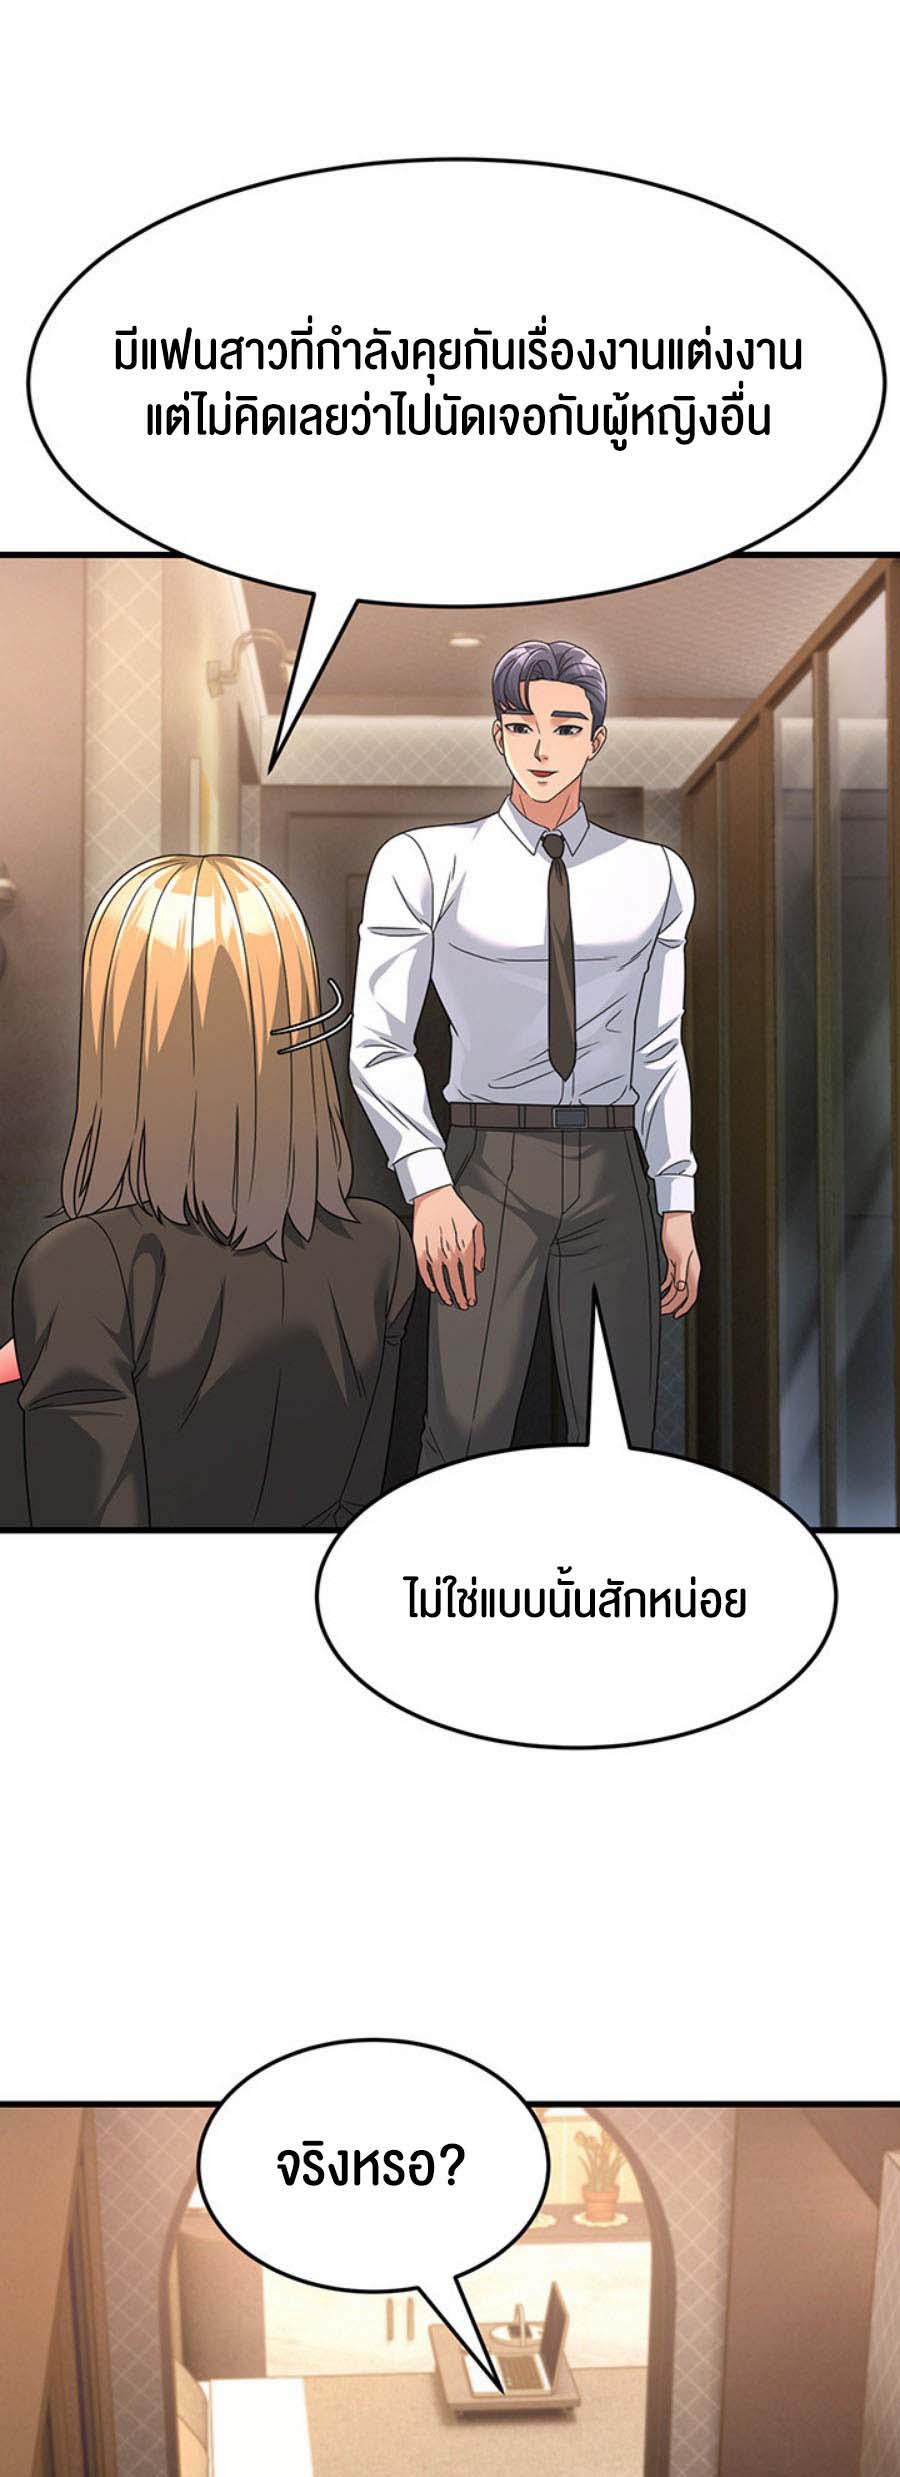 à¸­à¹ˆà¸²à¸™à¹‚à¸”à¸ˆà¸´à¸™ à¹€à¸£à¸·à¹ˆà¸­à¸‡ Mother in Law Bends To My Will 8 22